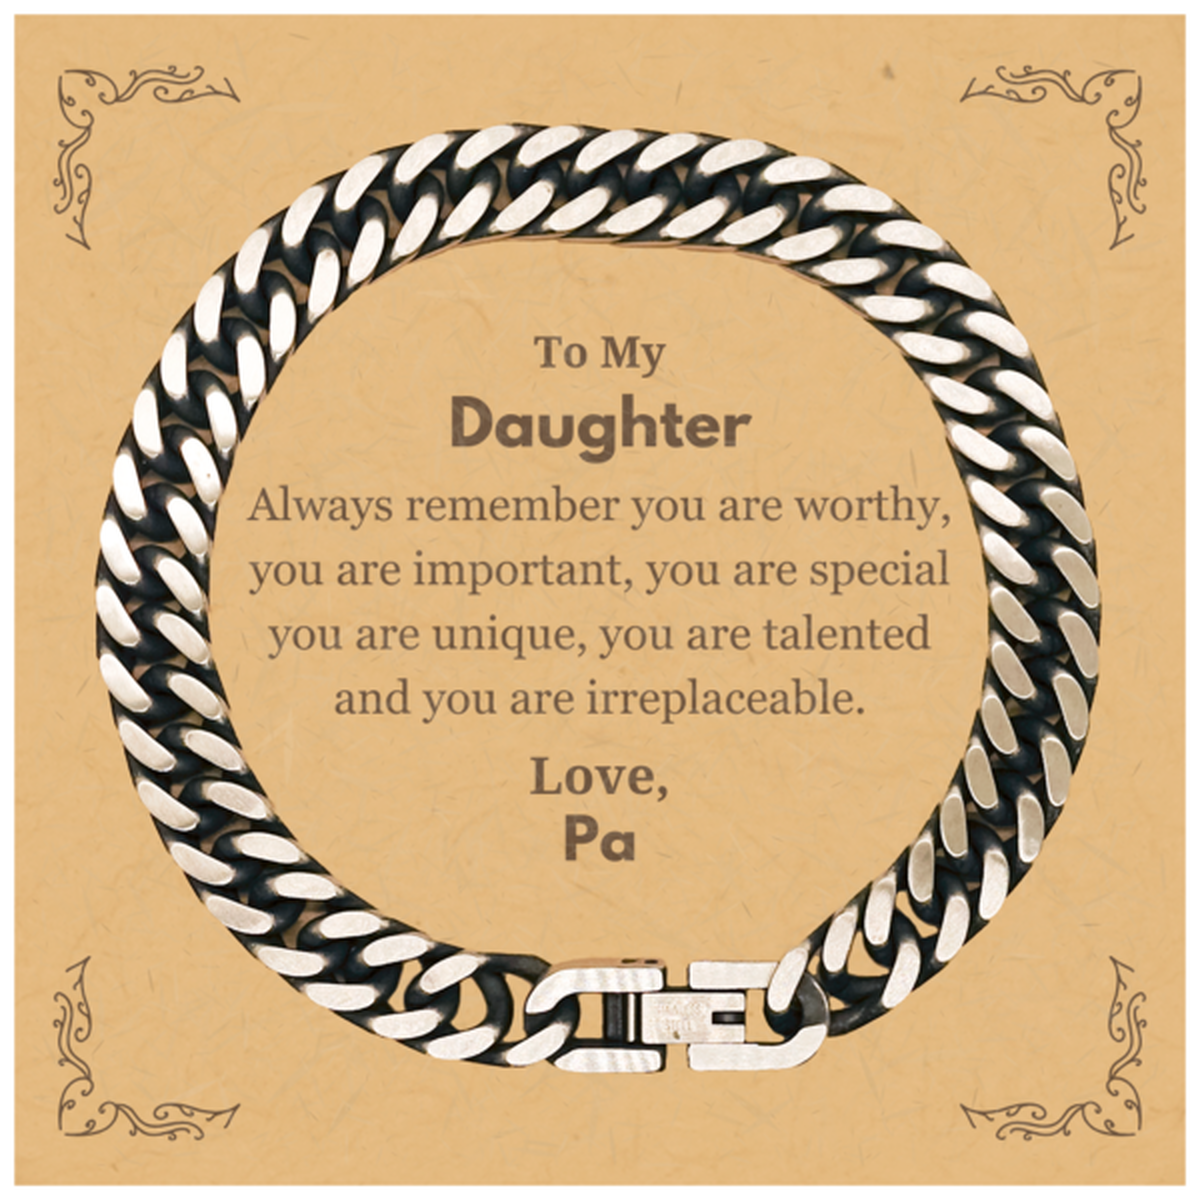 Daughter Birthday Gifts from Pa, Inspirational Cuban Link Chain Bracelet for Daughter Christmas Graduation Gifts for Daughter Always remember you are worthy, you are important. Love, Pa